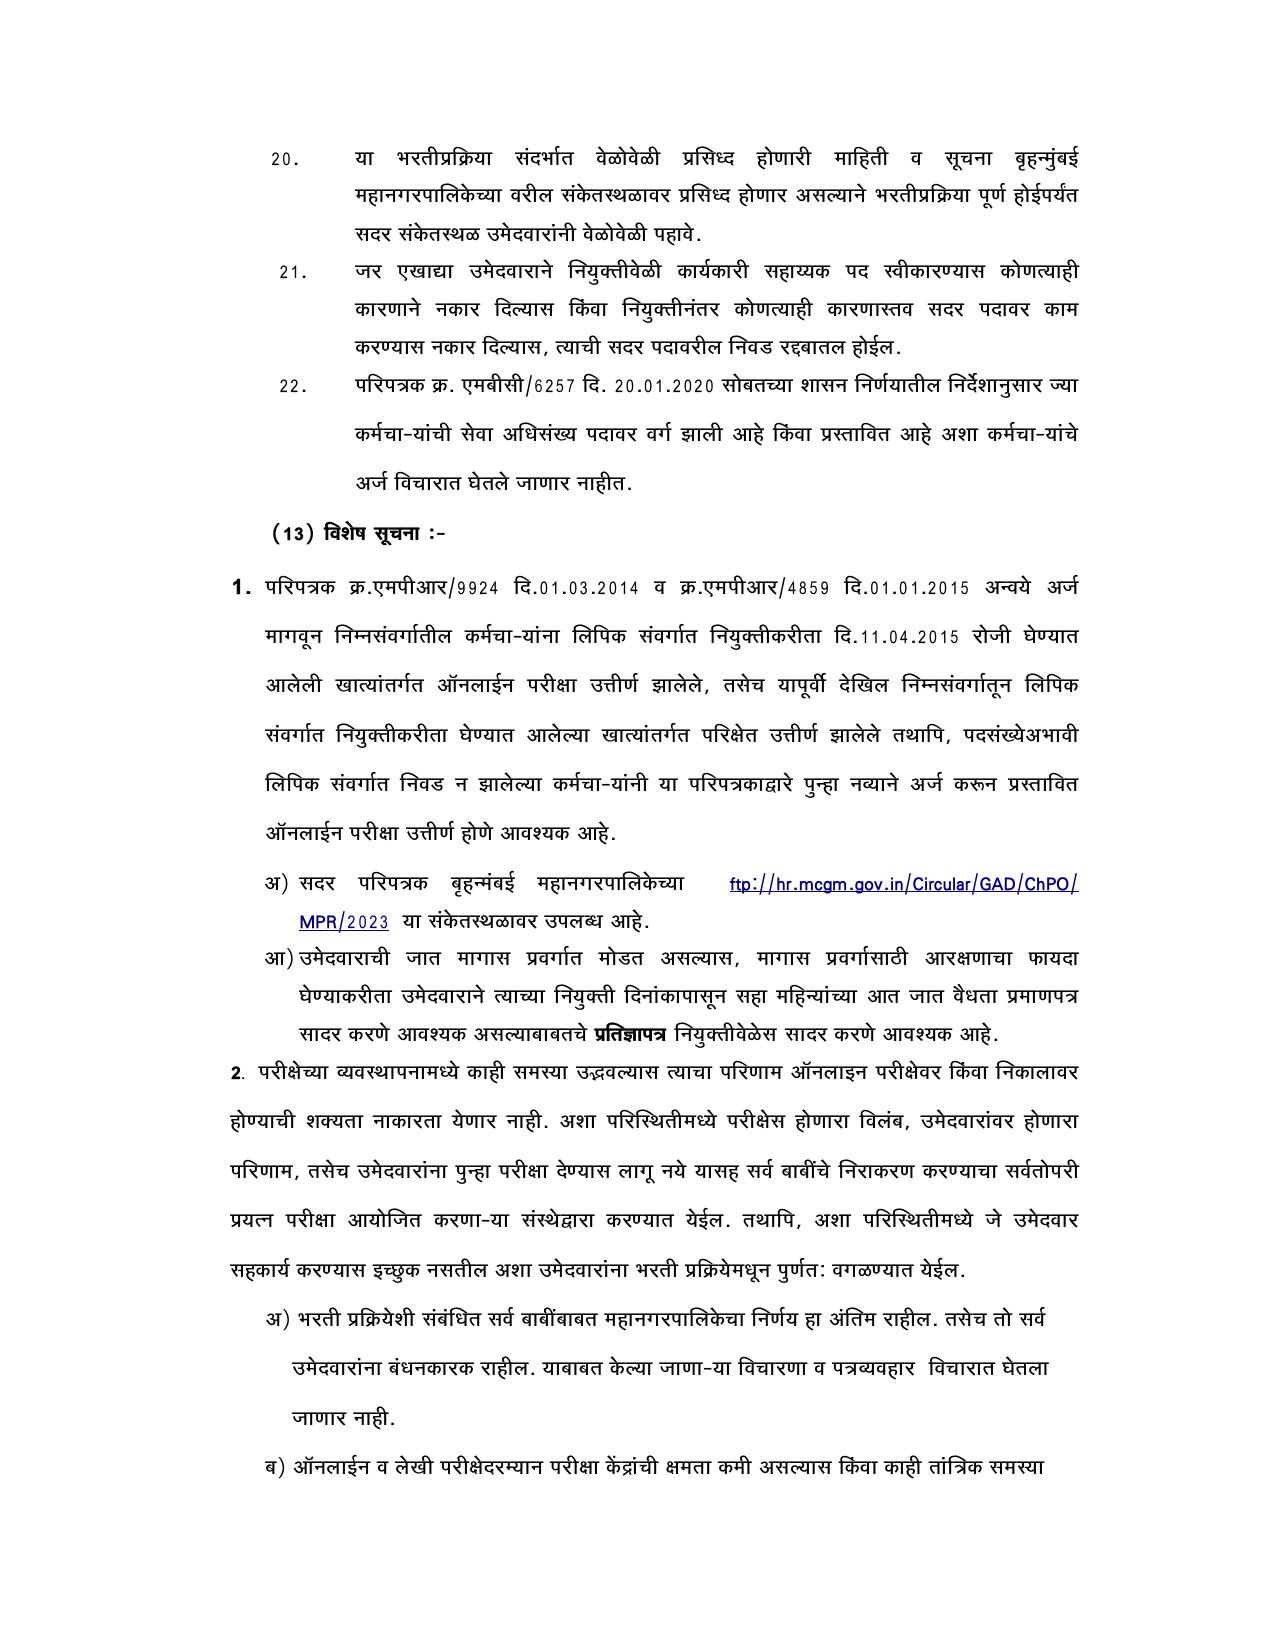 MCGM Executive Assistant Recruitment 2023 - Page 16